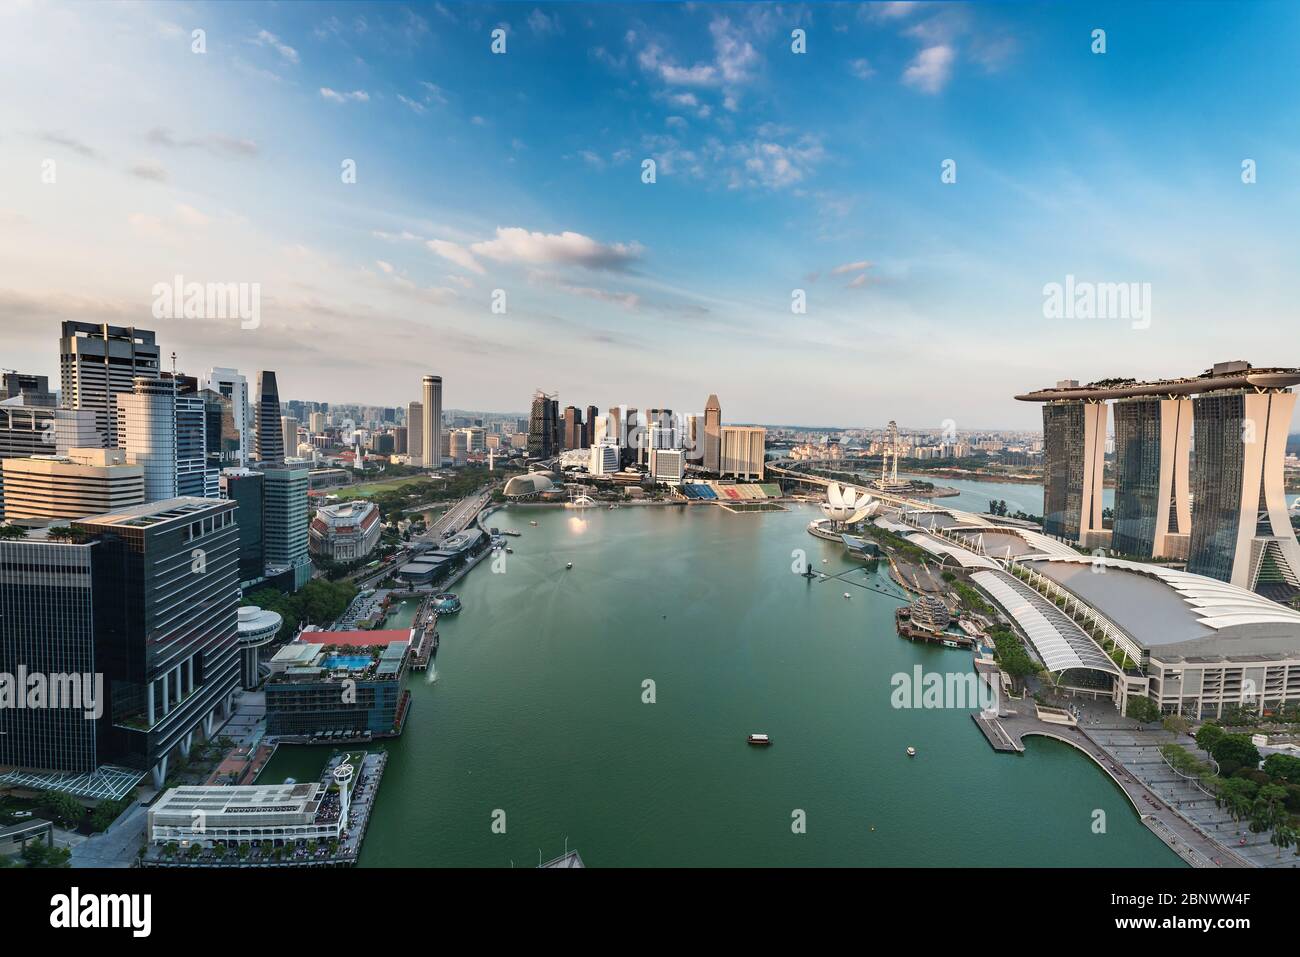 Singapore Marina Bay Area Skyline View. by night from Level 33 craft brewery Stock Photo